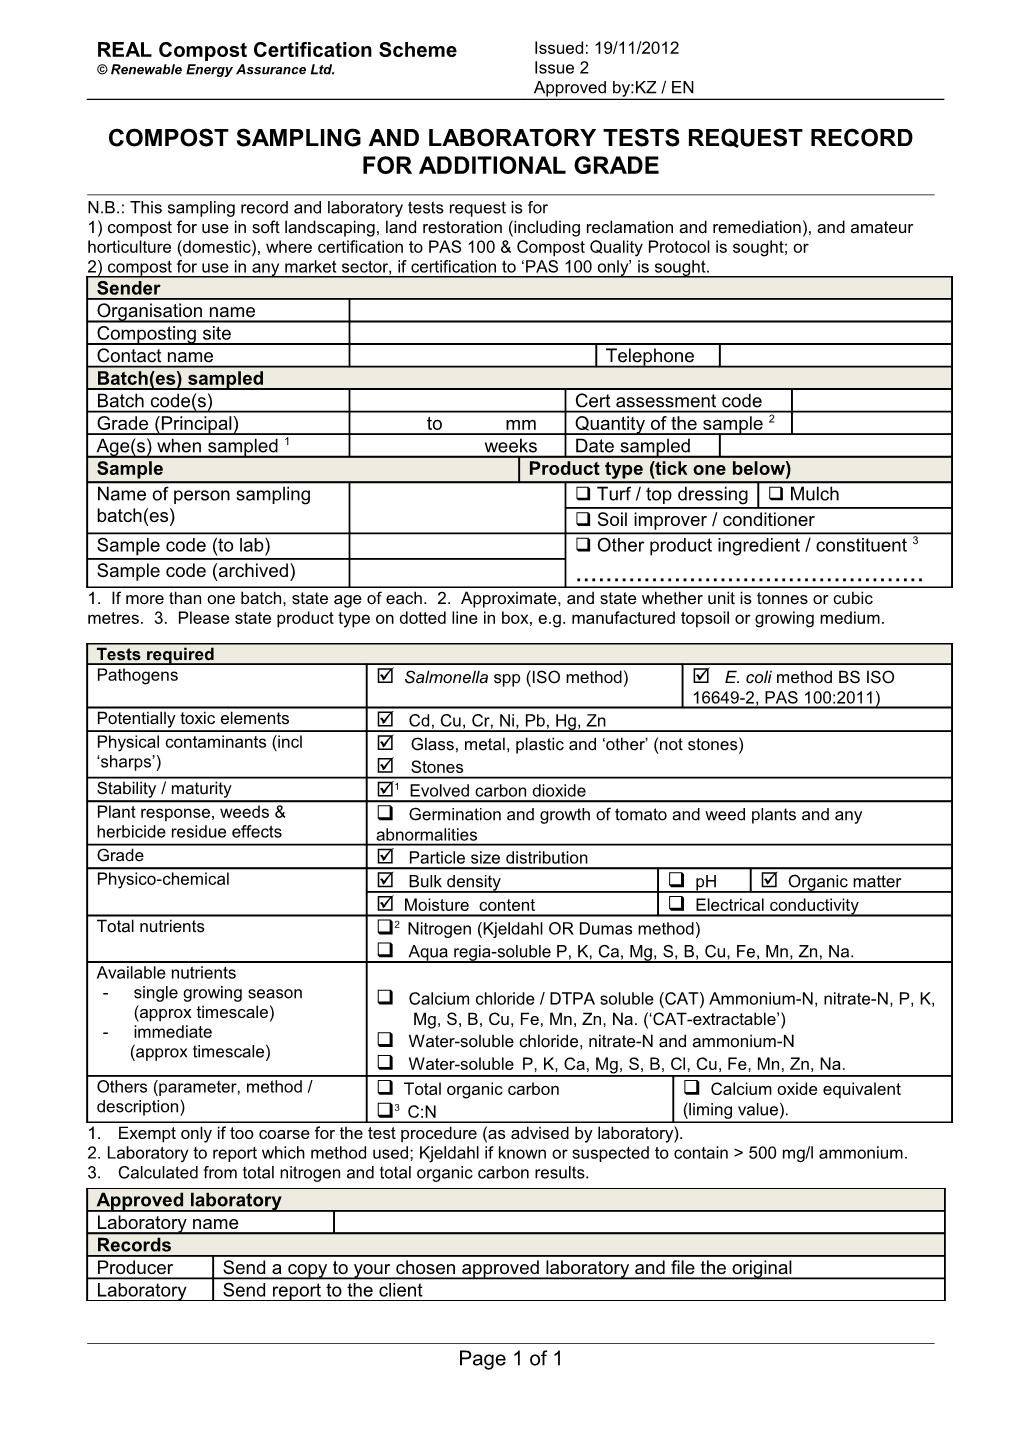 Compost Sampling and Laboratory Tests Request Record for Additional Grade